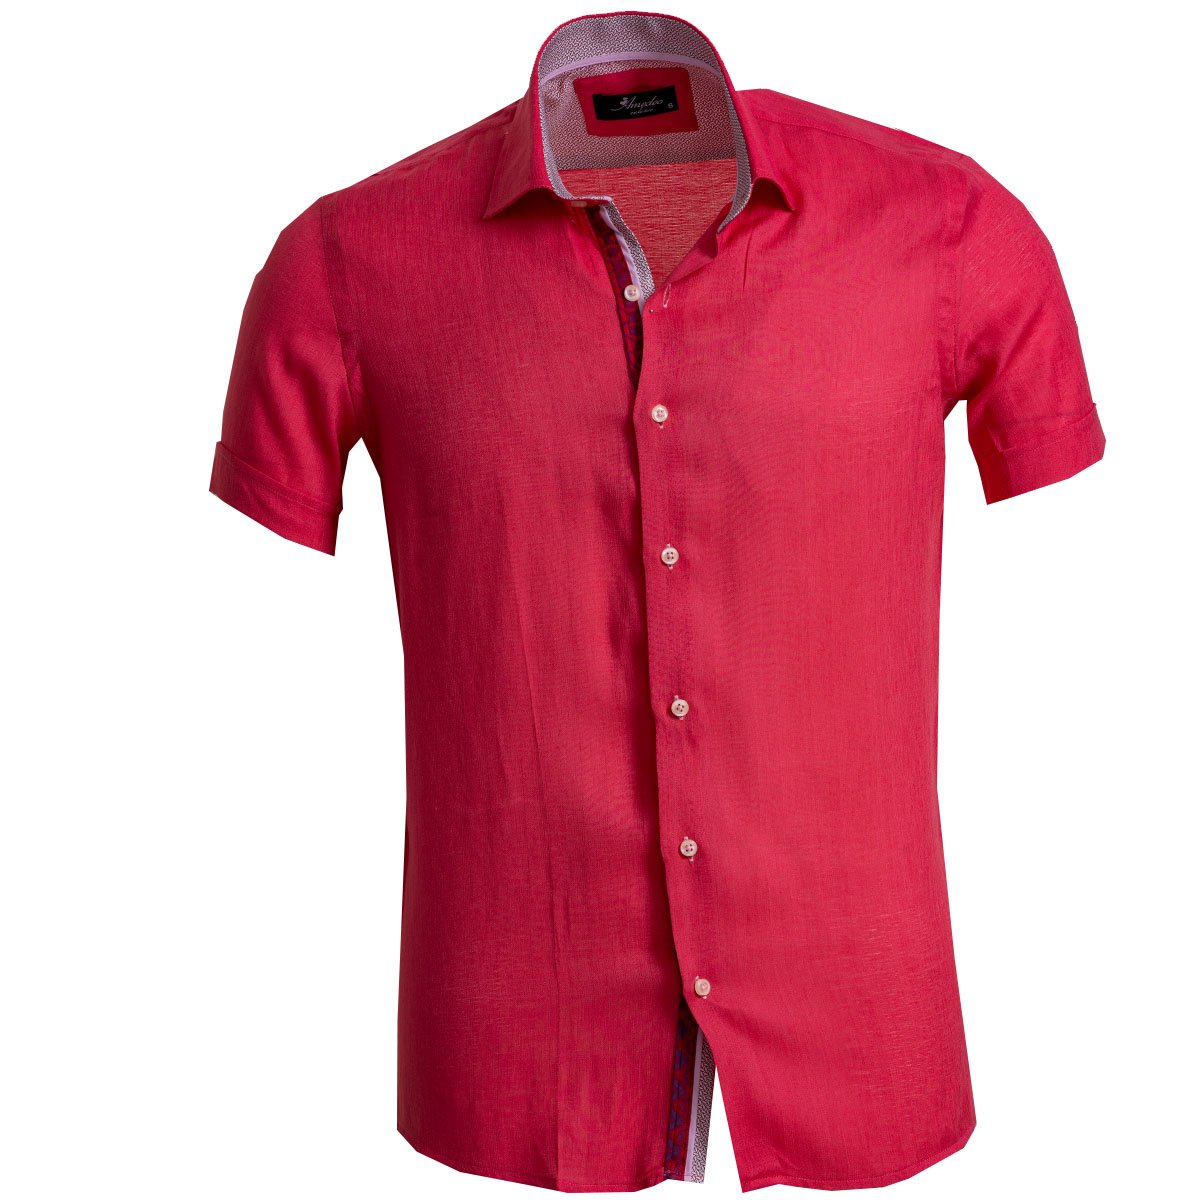 red and white button up shirt mens